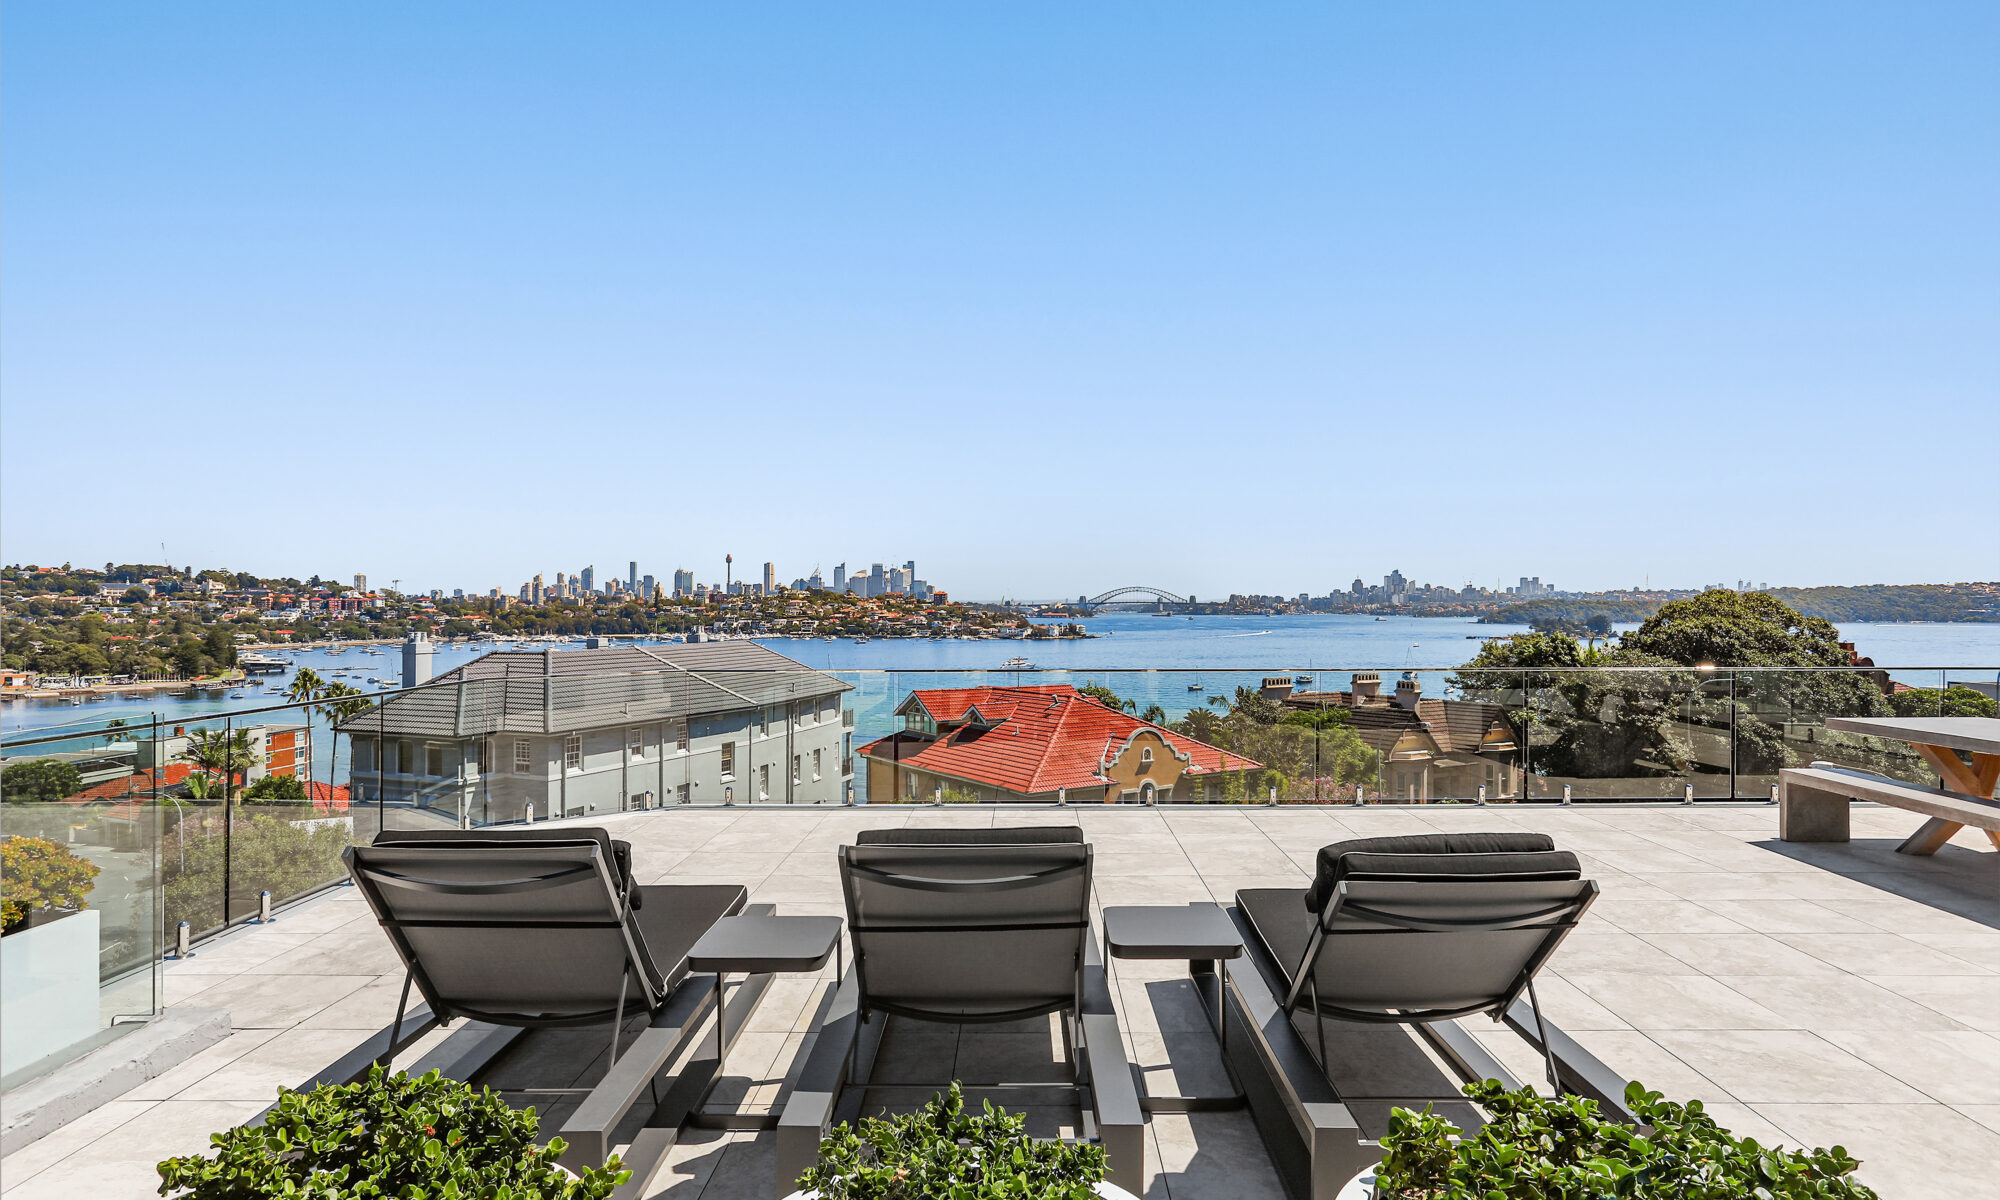 Million dollar penthouse with sunbeds over looking Sydney Harbour